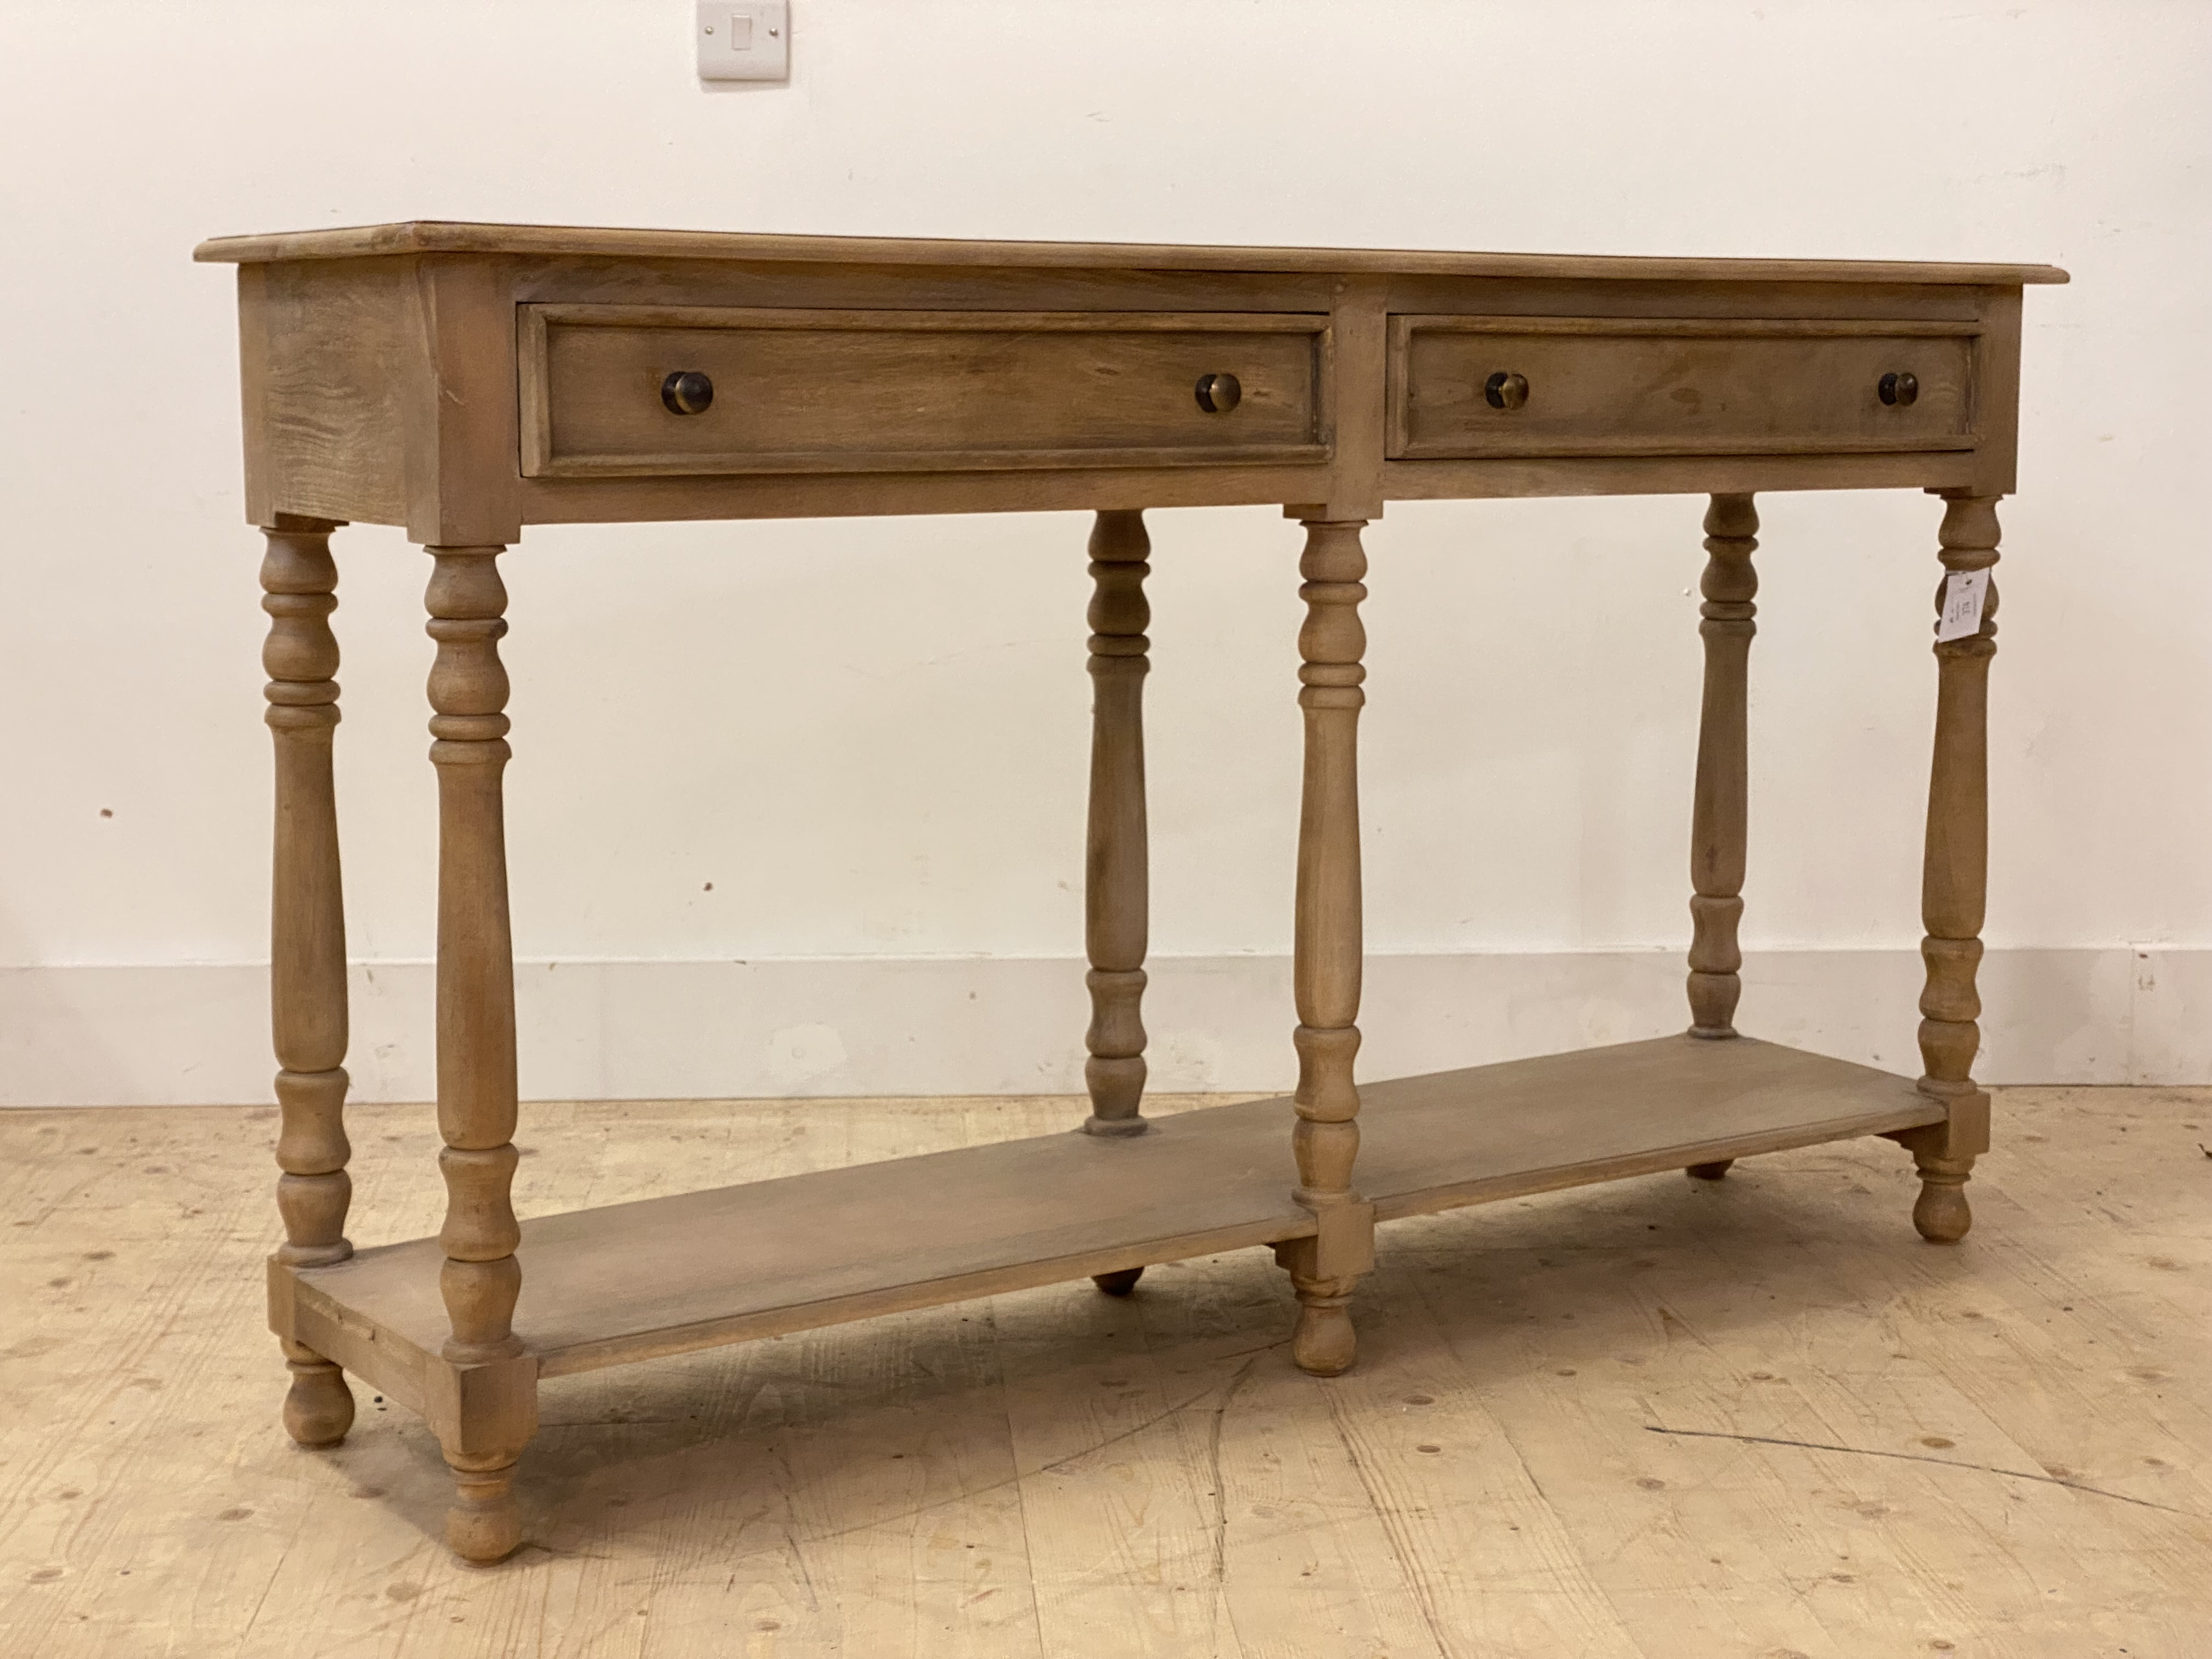 An 18th century style bleached walnut dresser base, fitted with two drawers over turned supports